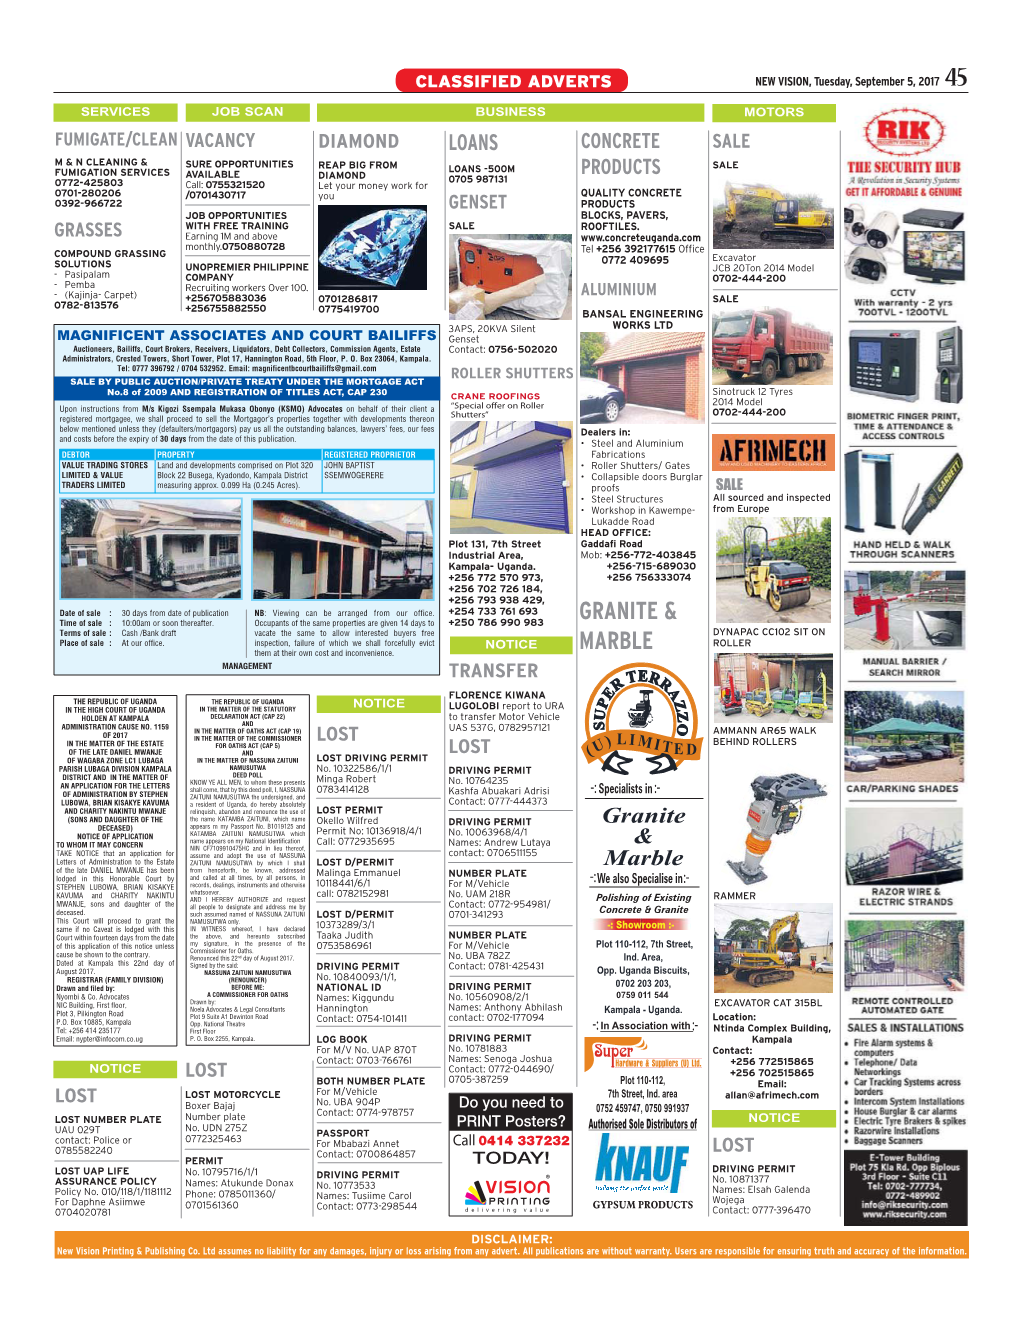 CLASSIFIED ADVERTS NEW VISION, Tuesday, September 5, 2017 45